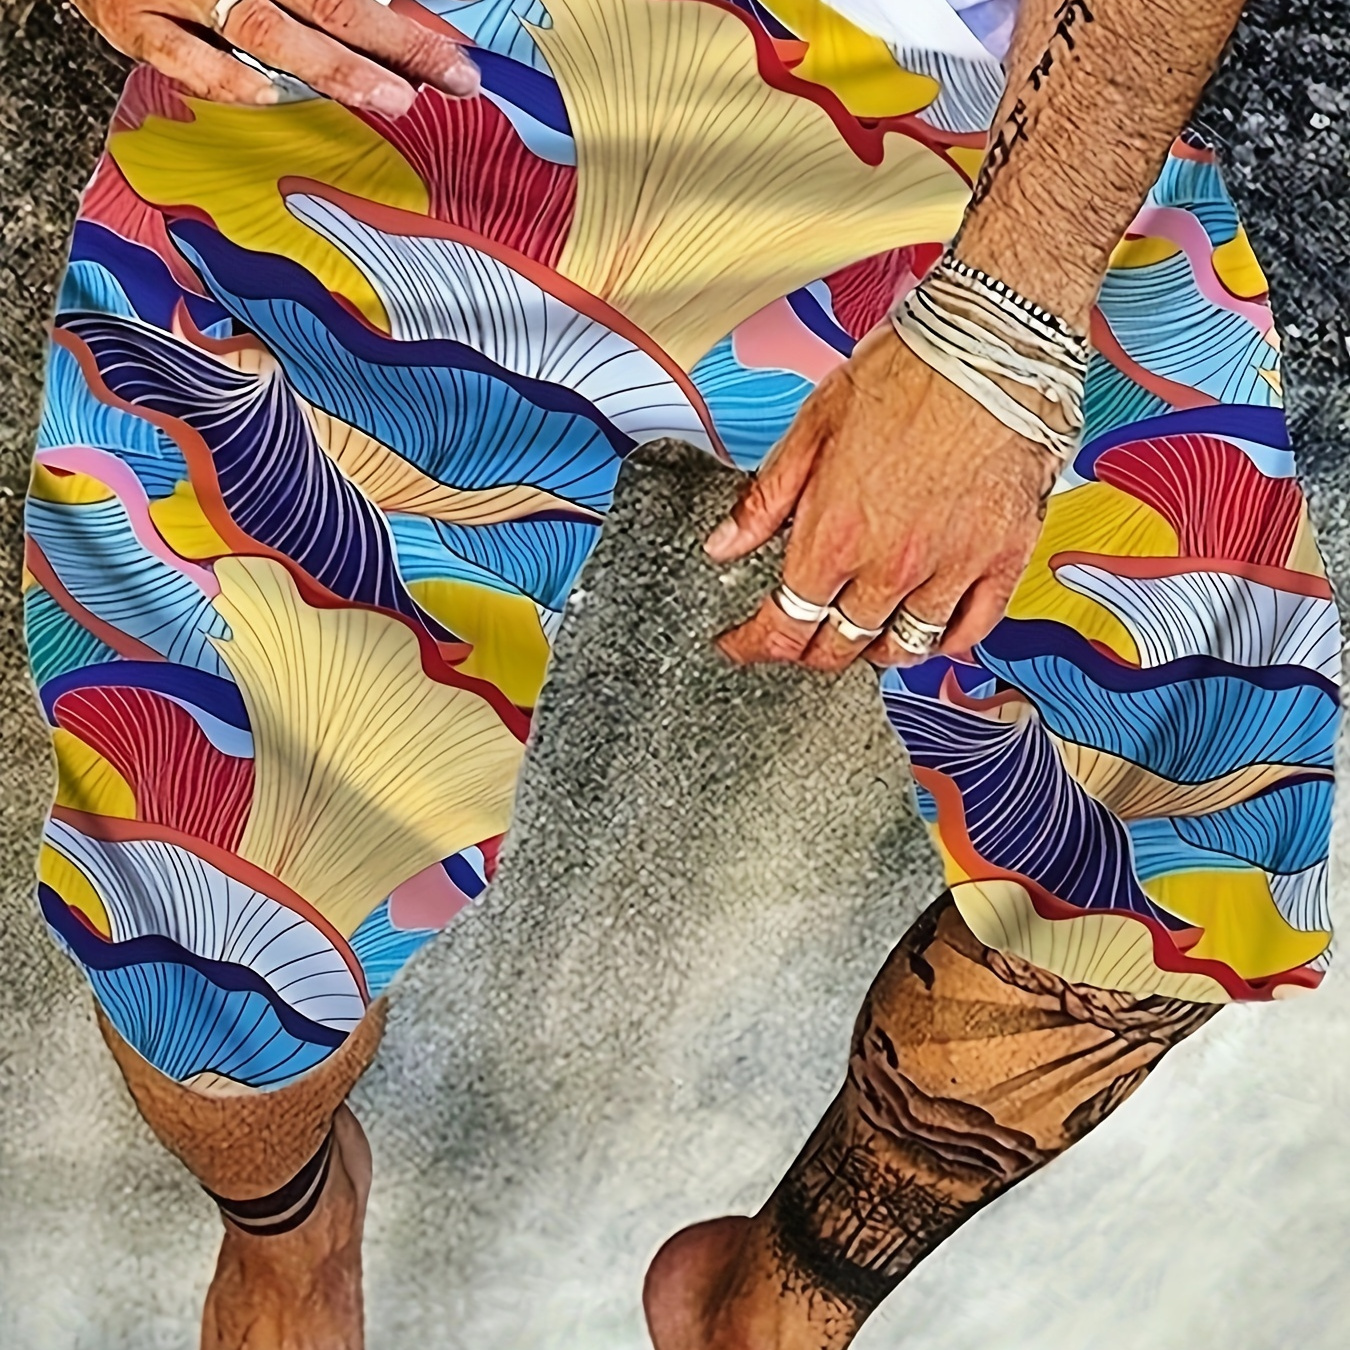 

Men's Fashion Colorful Abstract Design Print Beach Shorts, Quick Dry Lightweight Summer Swim Trunks